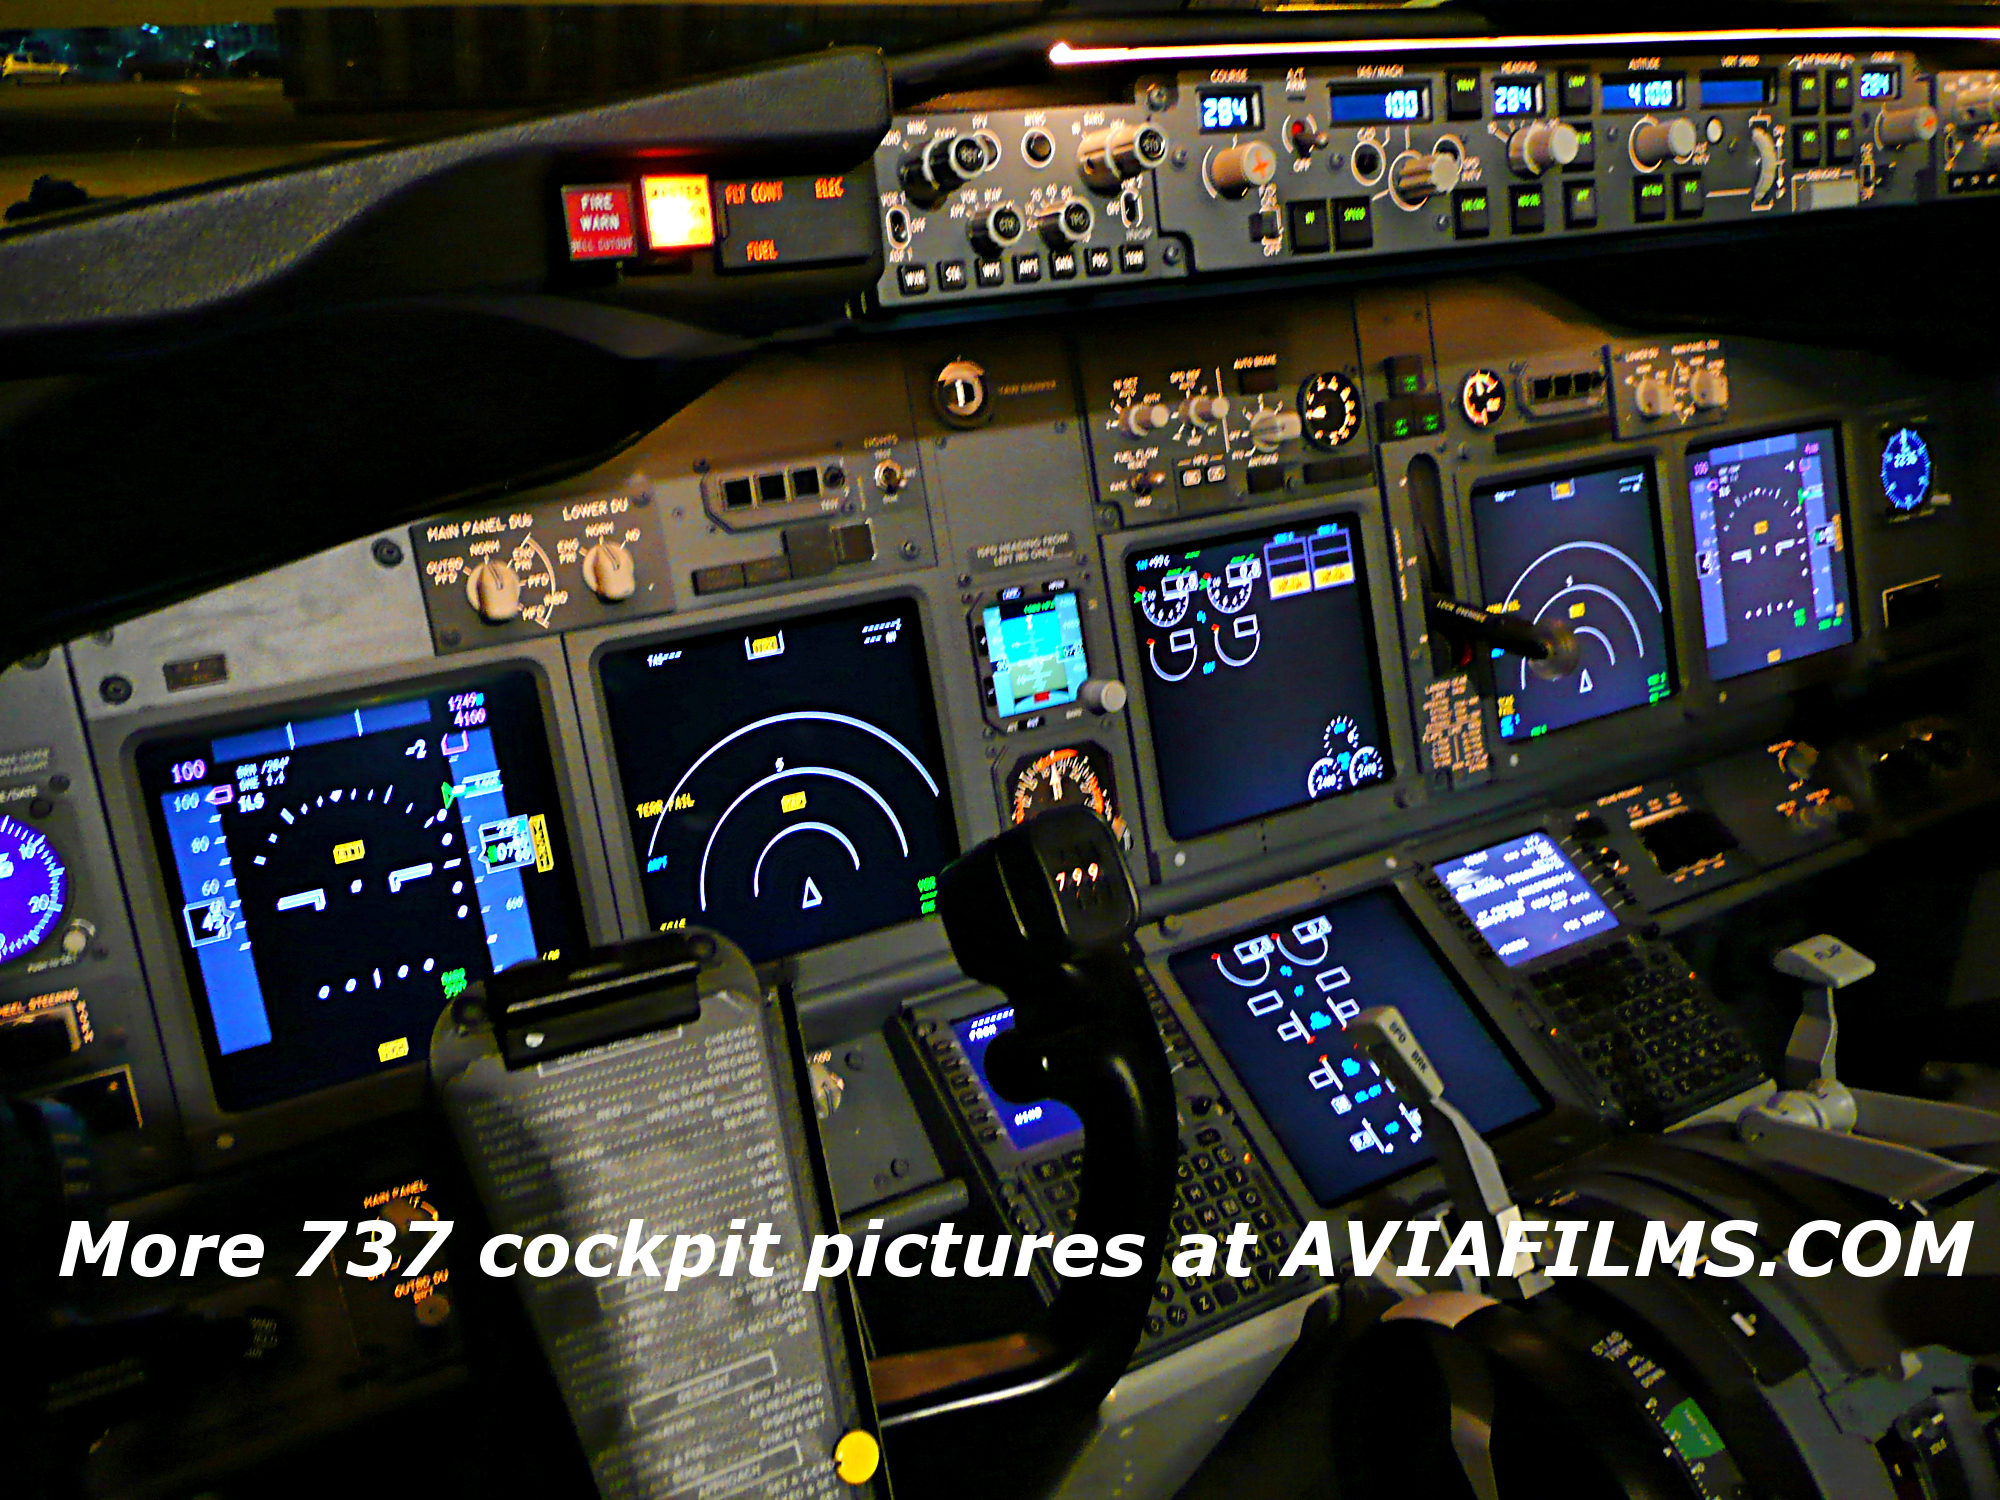 Airplane Image Featuring Cockpit Pictures And Awesome Aircraft